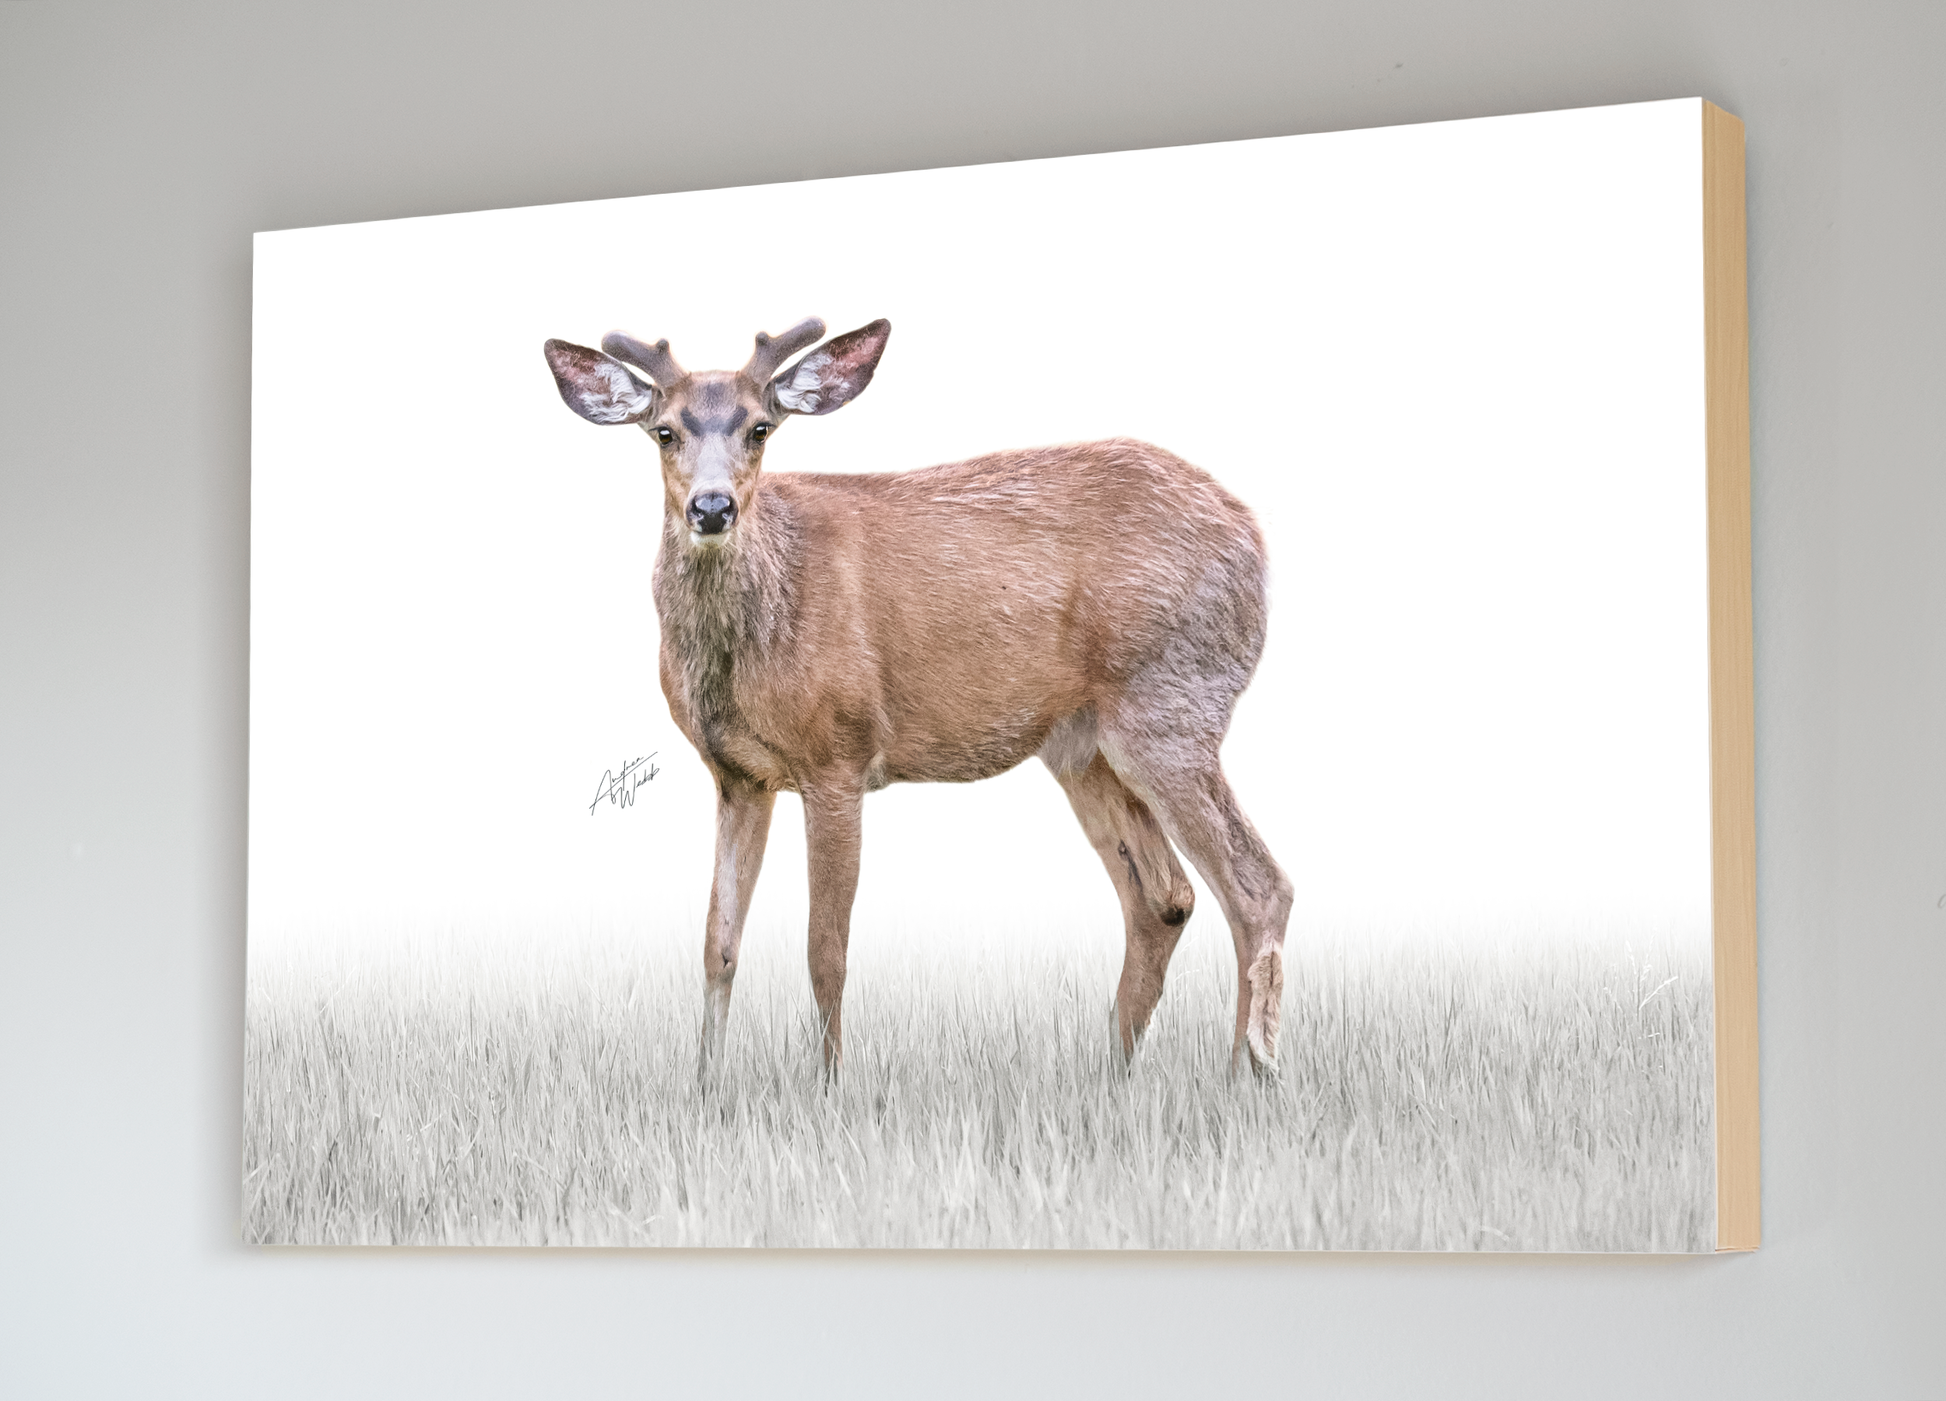 A close-up portrait of a mule deer buck in velvet, showcasing its strength and elegance. The deer stands against a white background, with grass blades in the foreground, creating a serene and captivating scene. Mule deer buck artwork. Mule deer buck art. Mule deer buck portrait. Mule deer buck canvas. Mule deer buck gifts.